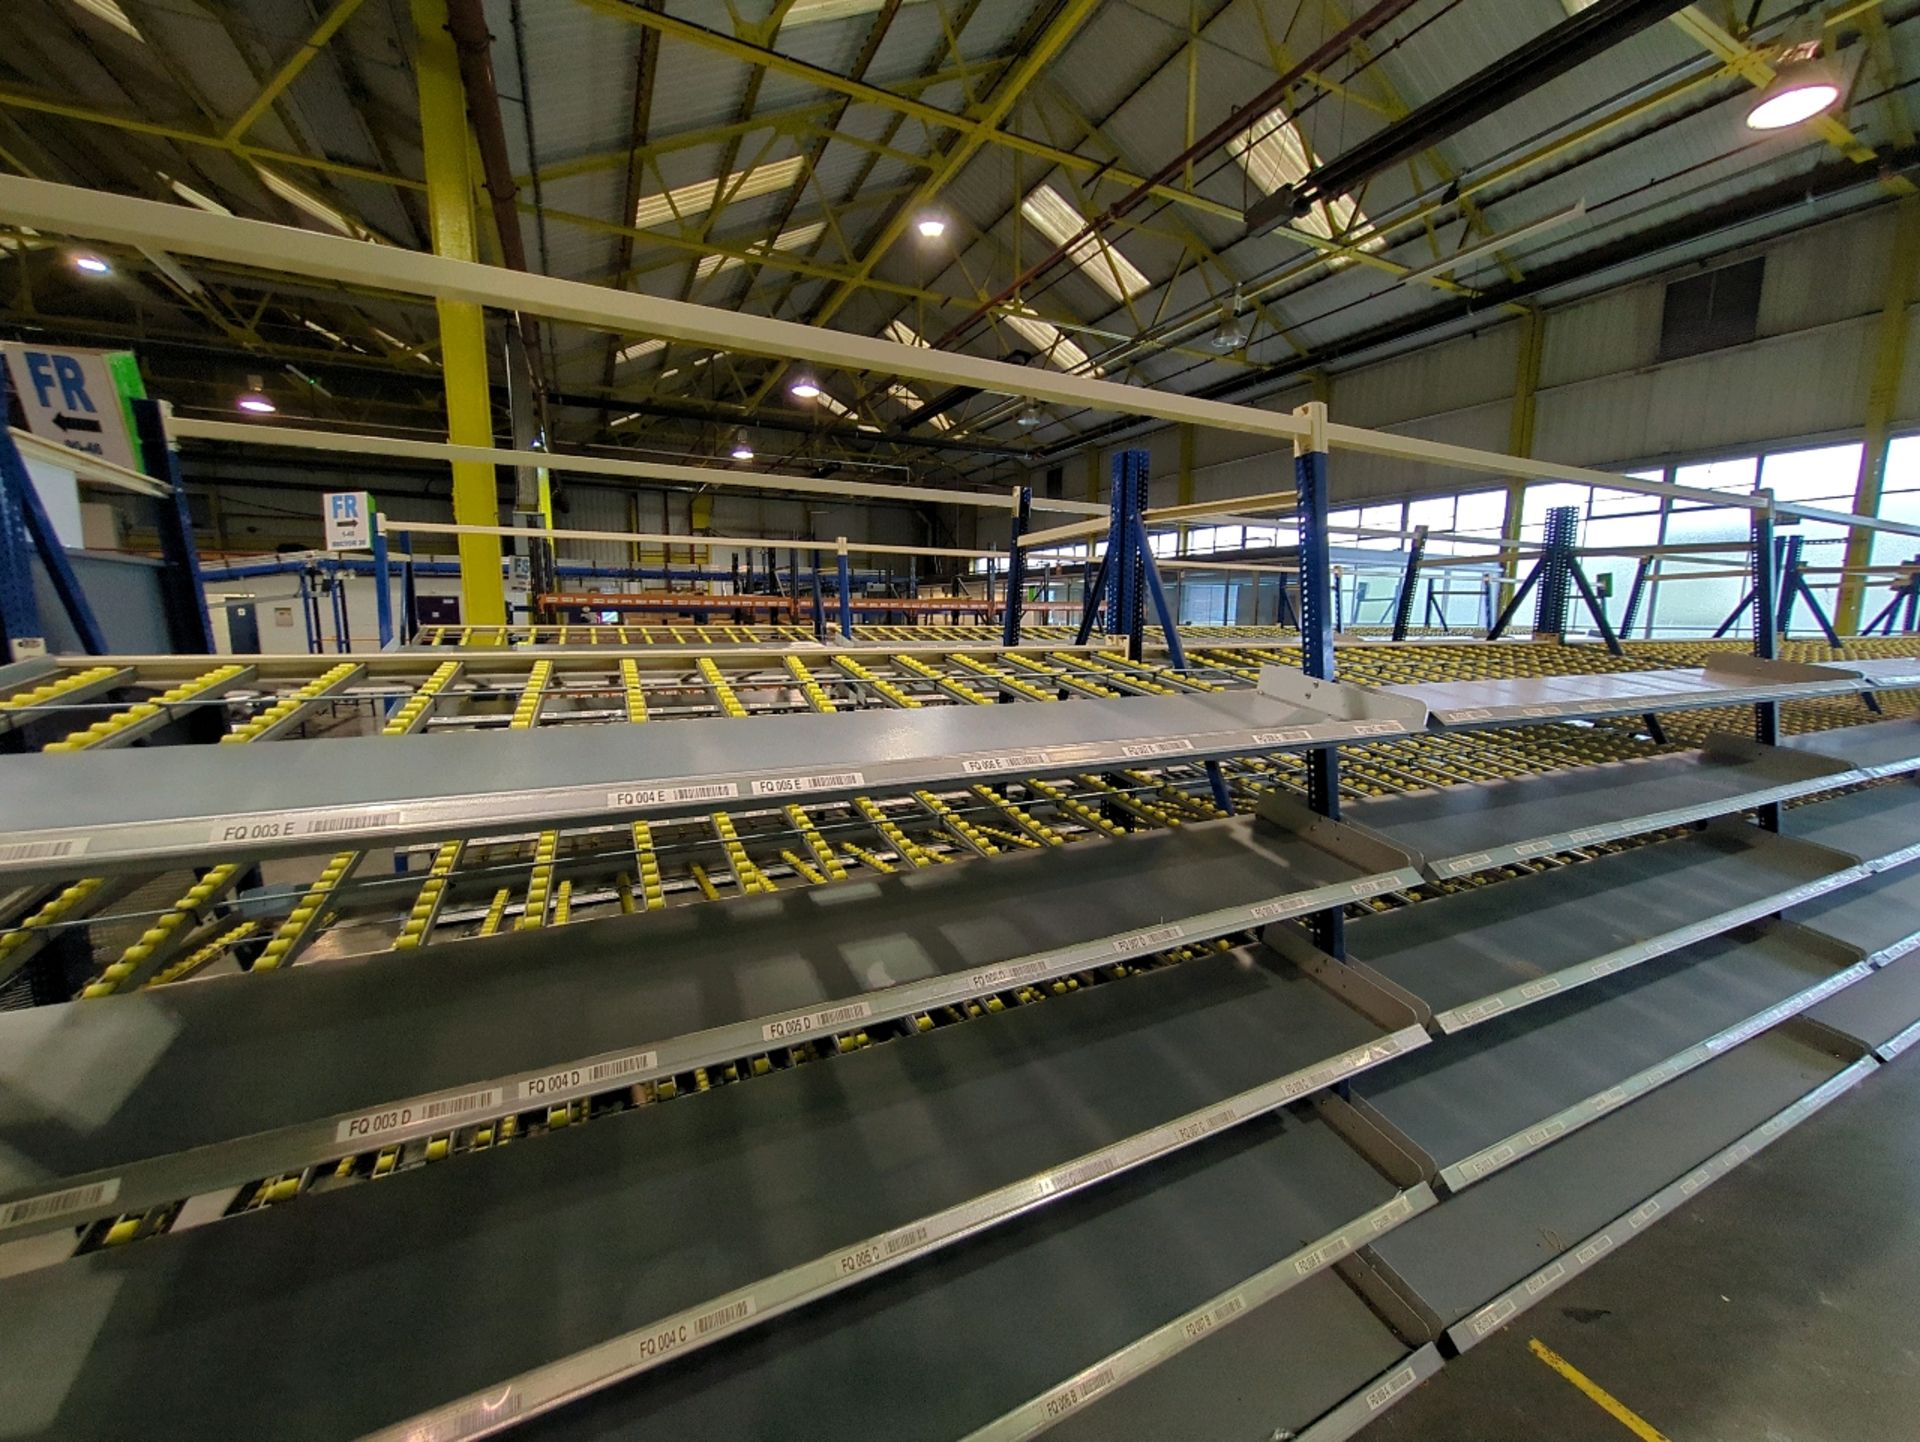 A Run Of 10 Bays Of Back To Back Kaiserkraft Roller Track With Cylindrical Rollers - Image 3 of 12